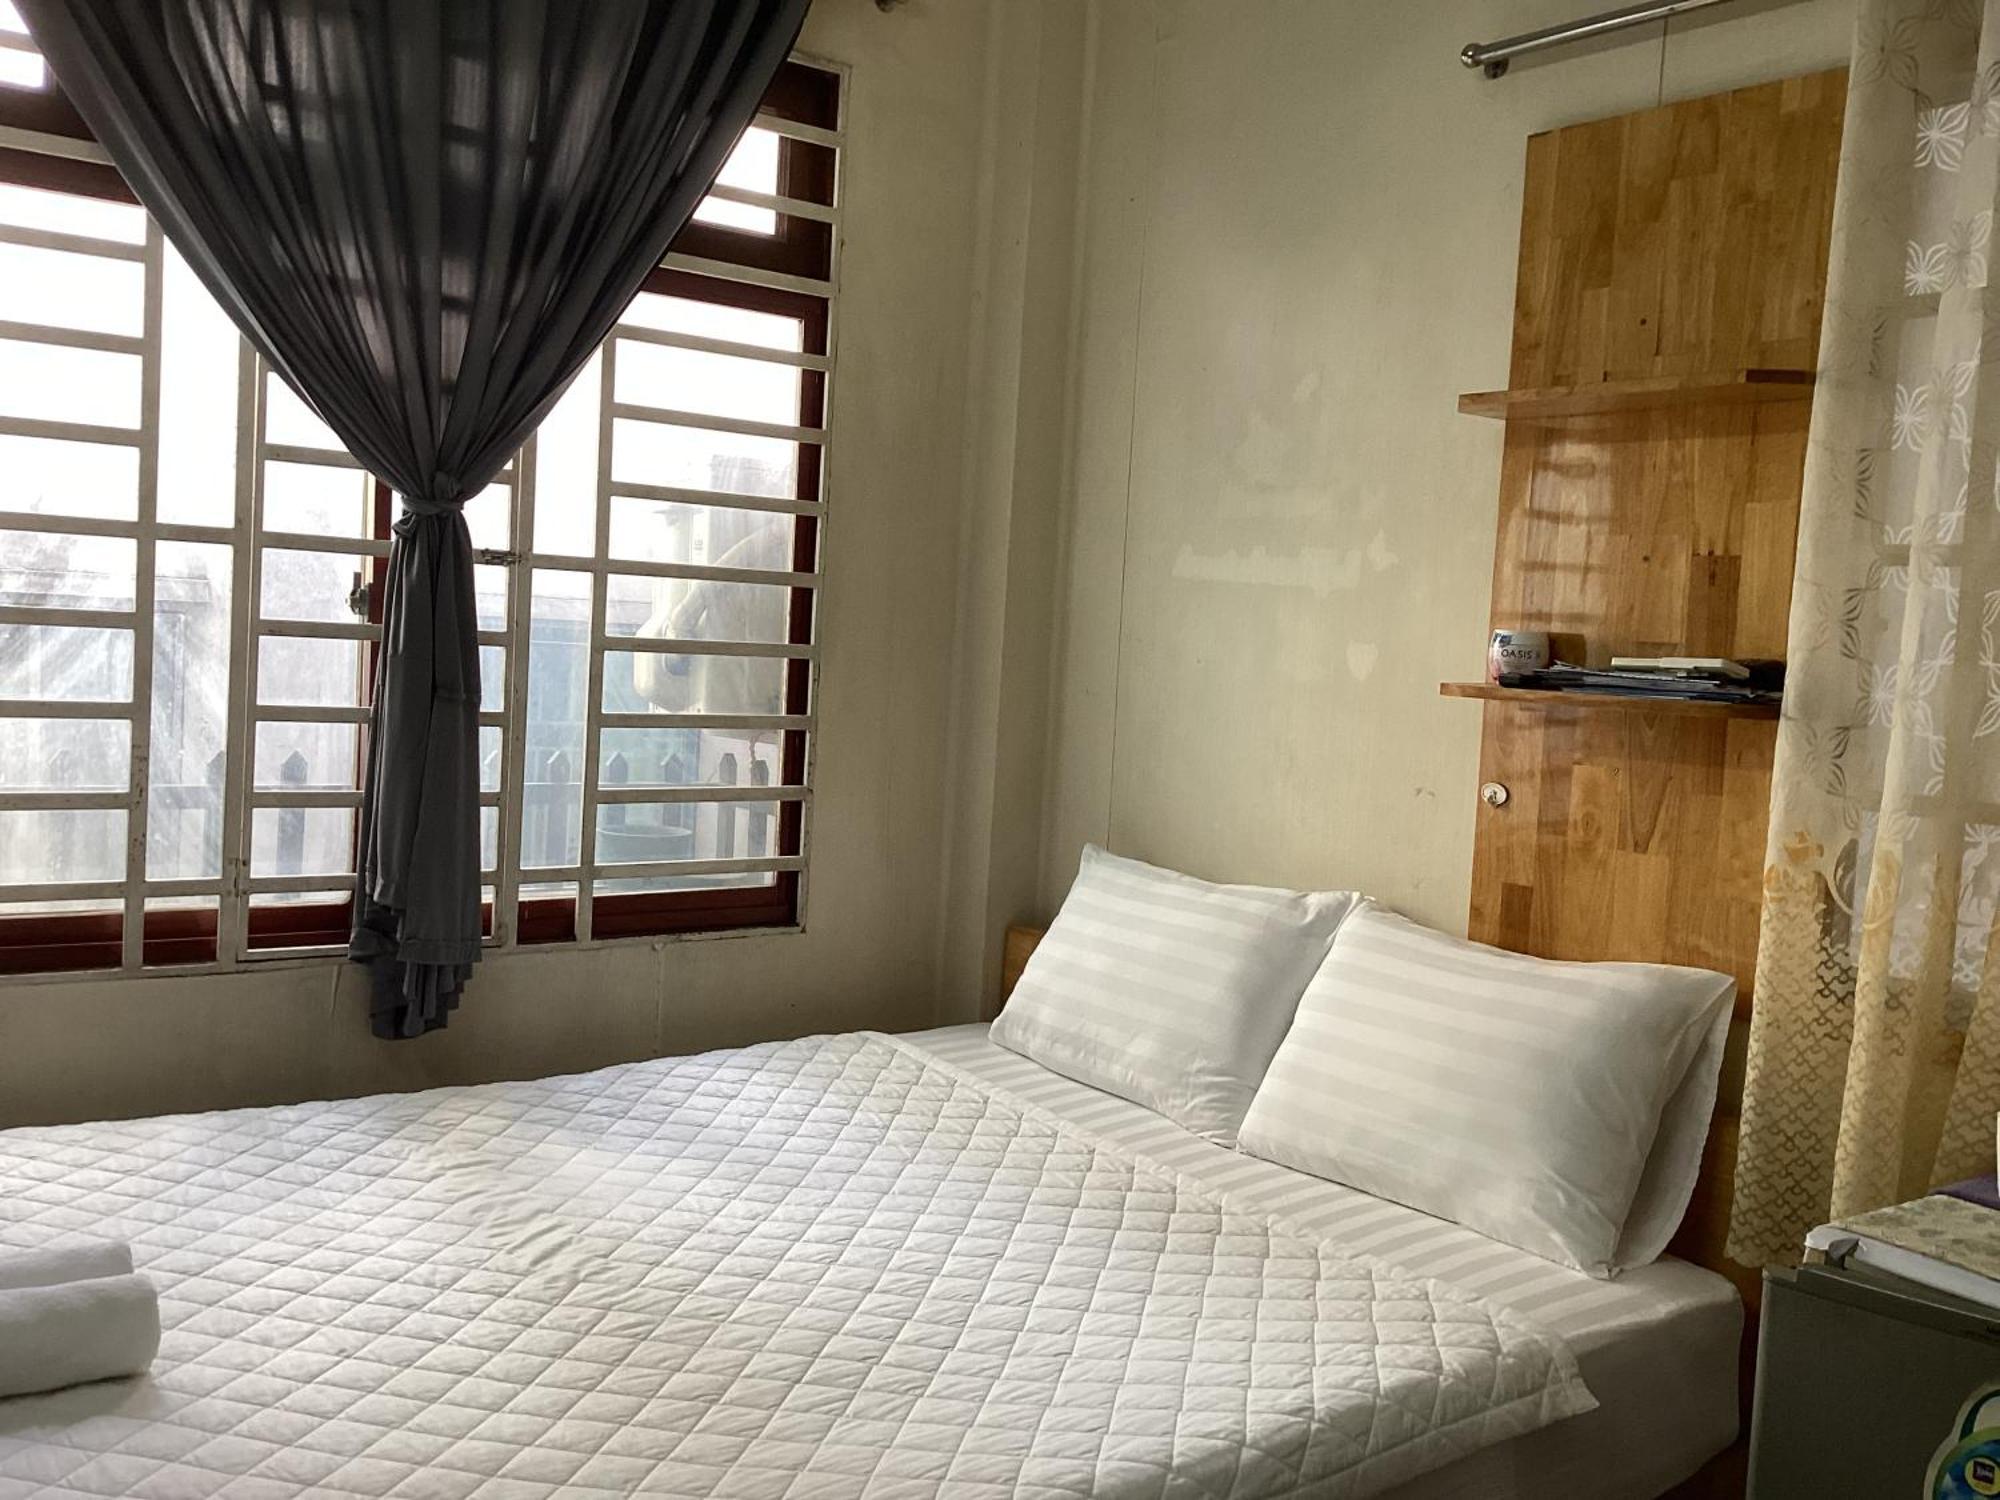 Guest House Uttrang Ho Chi Minh City Exterior photo